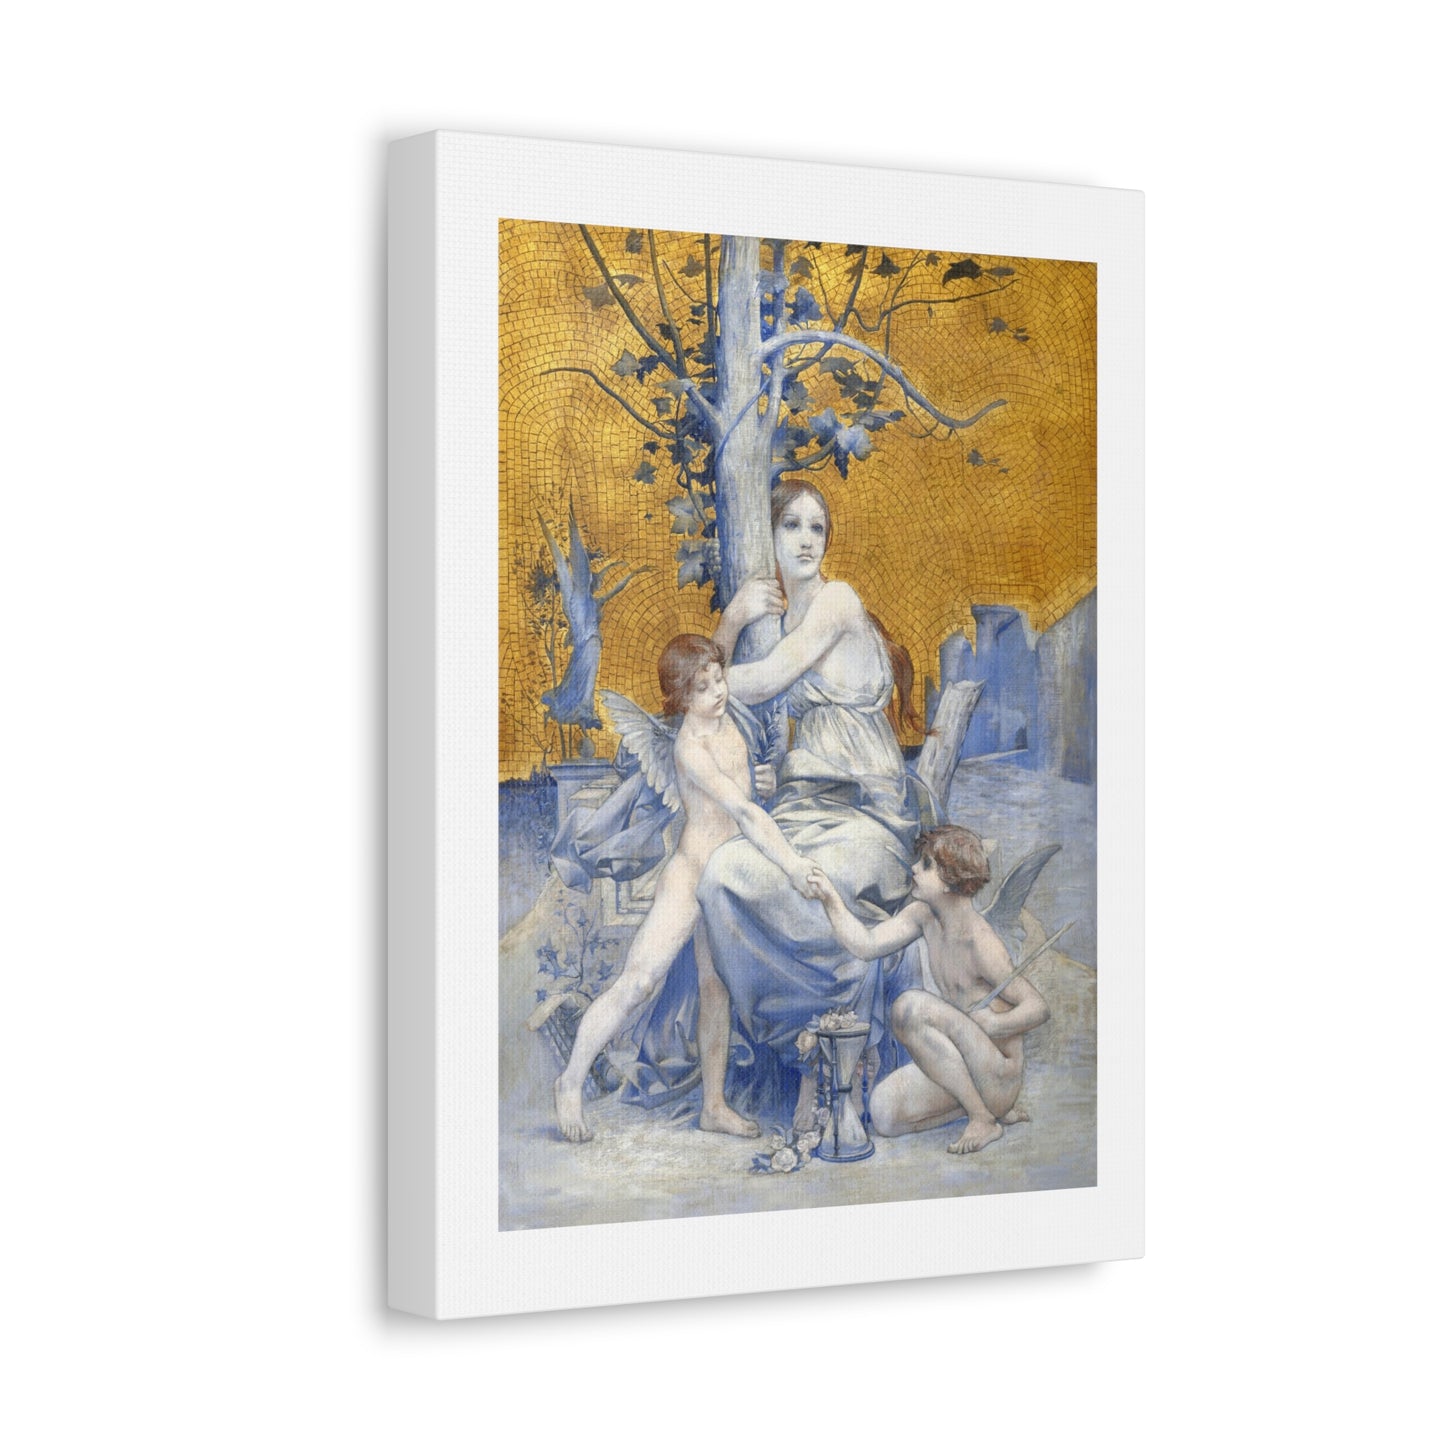 Allegory of Time (1896) by Luc-Olivier Merson, Canvas Print from the Original